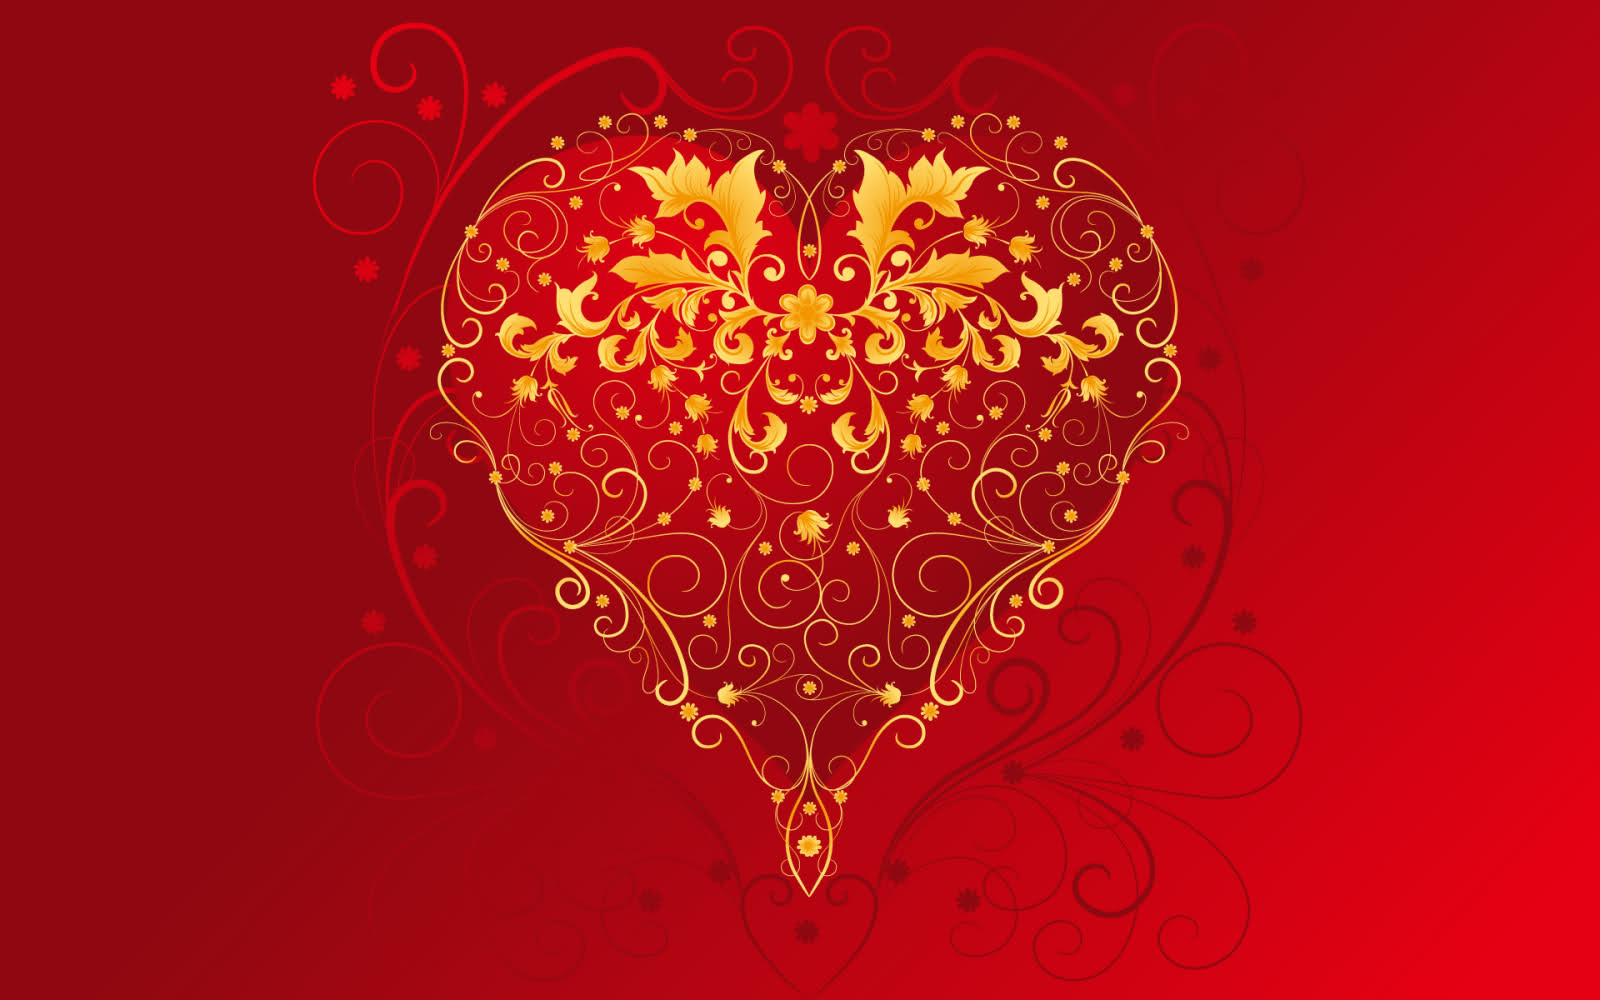 20 Valentines Day Images Free Download - Feed Inspiration